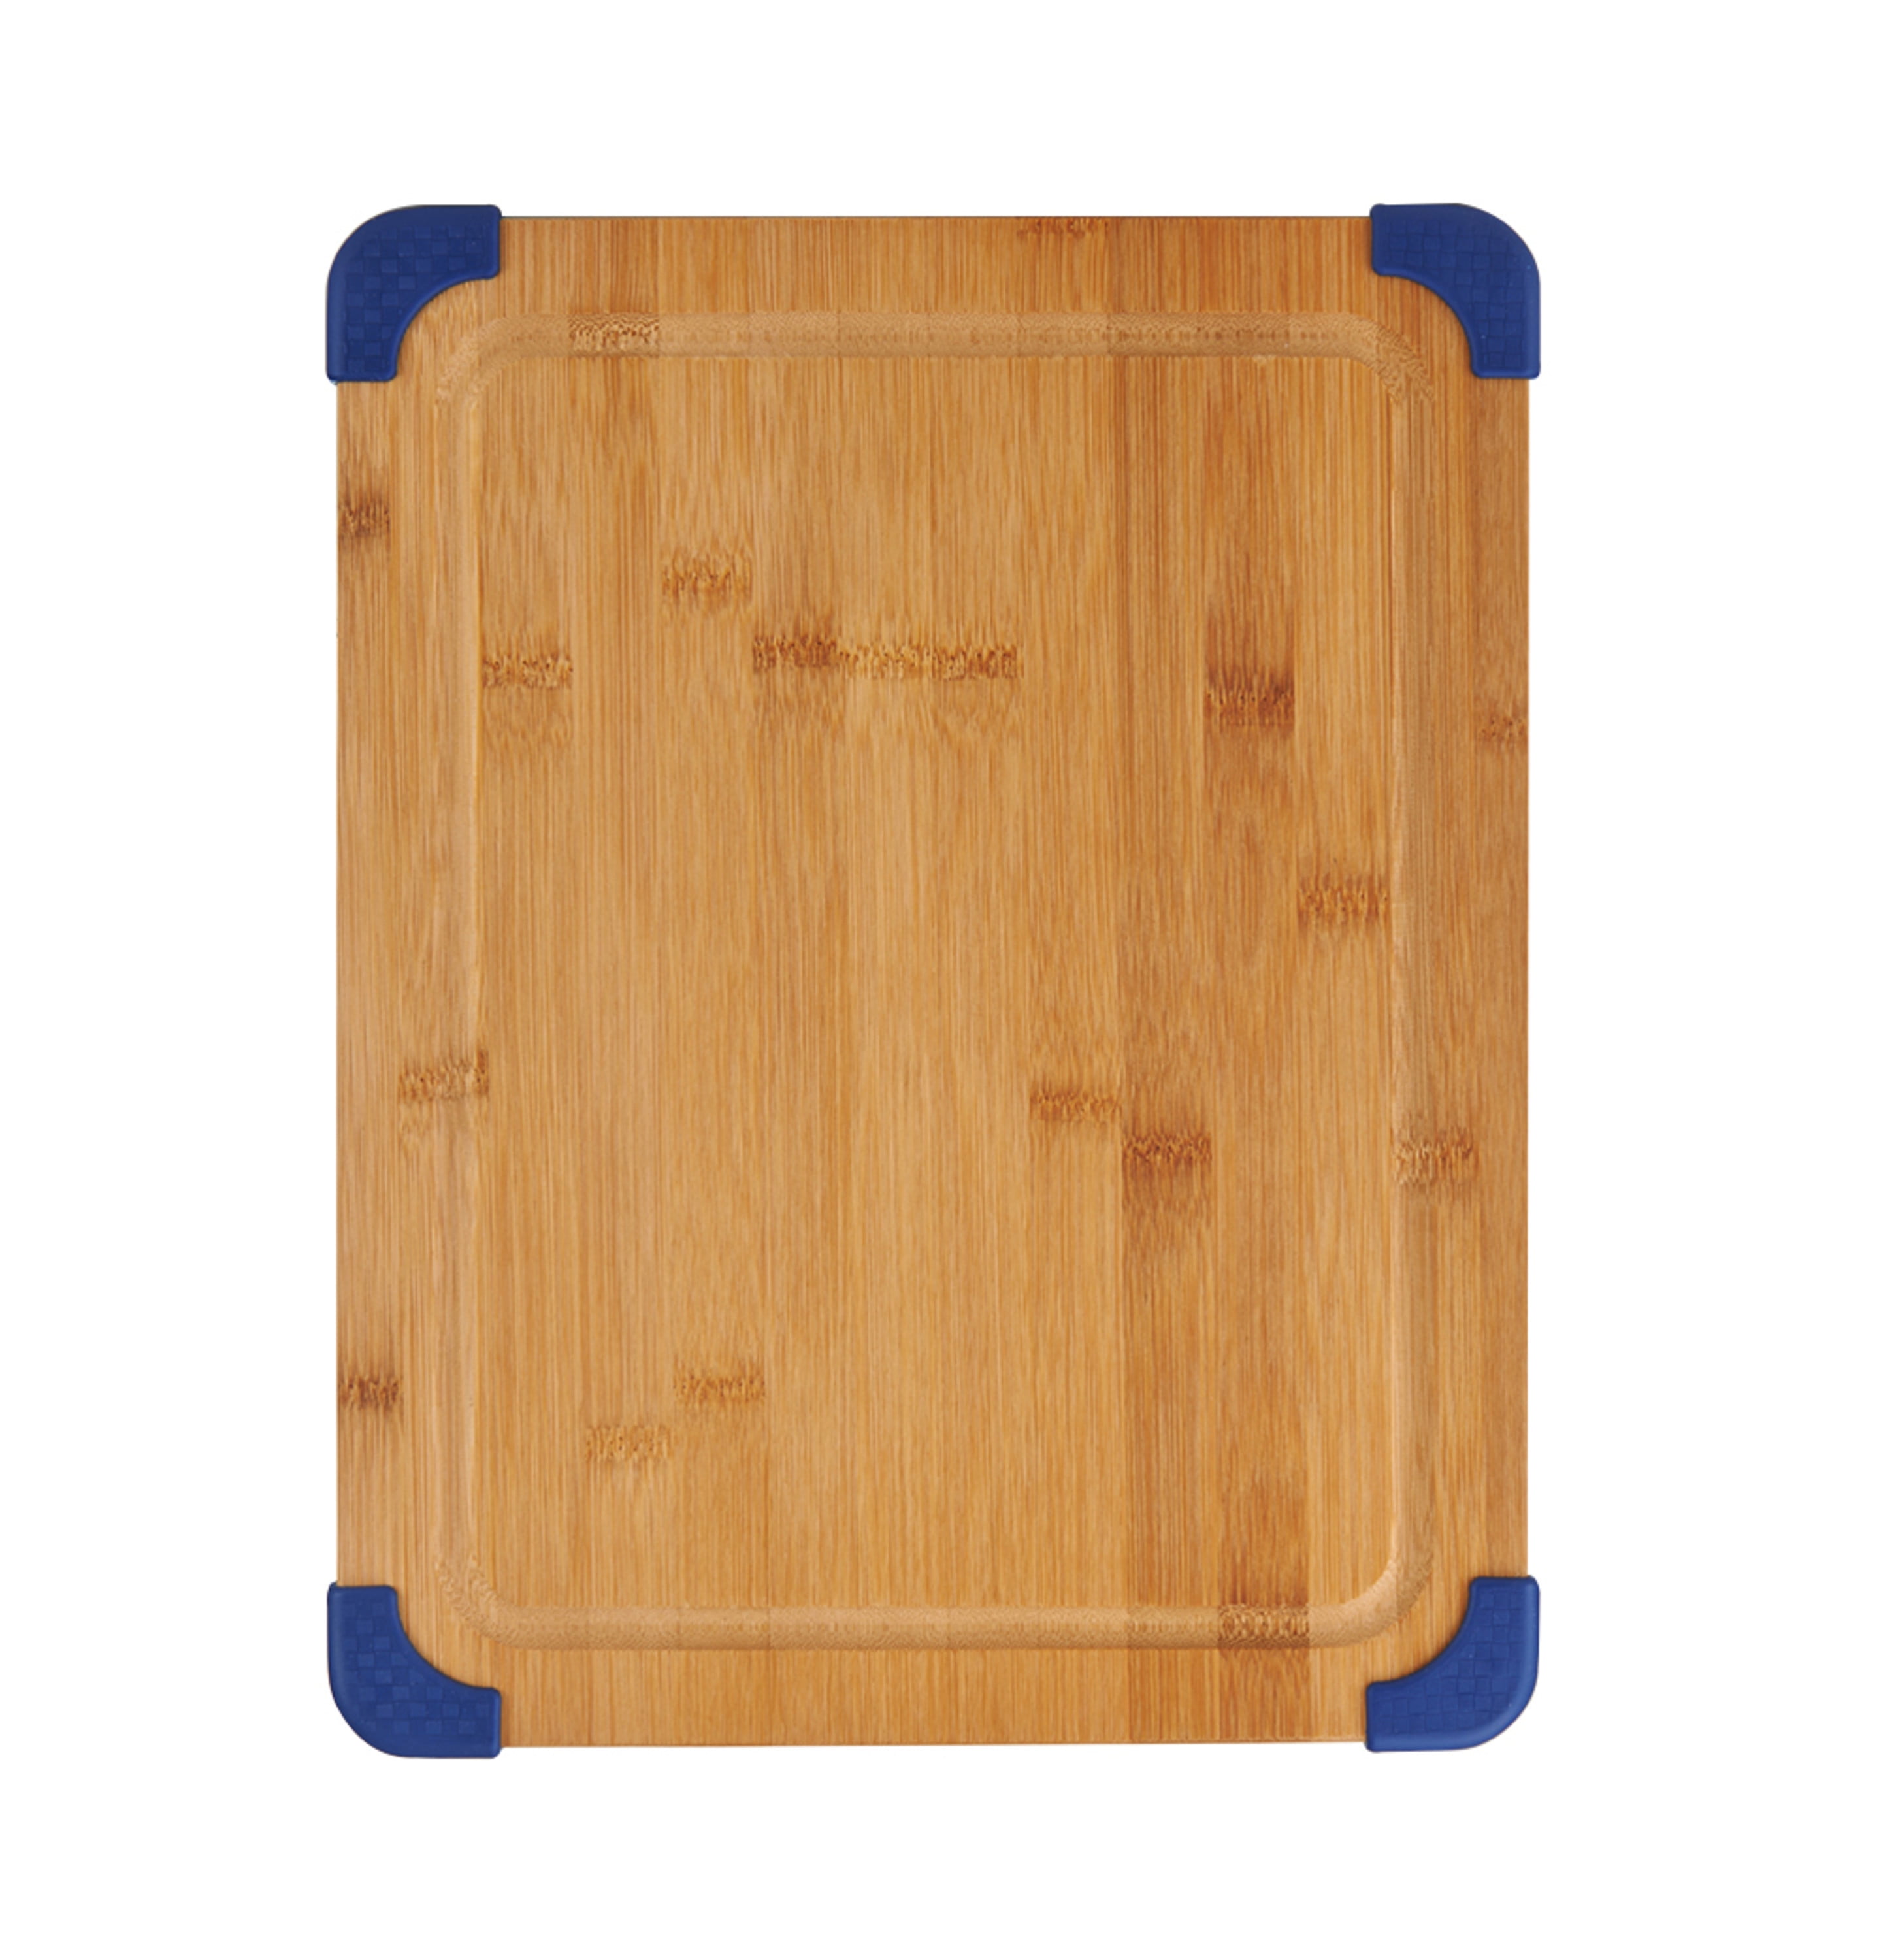 Farberware 12x18 inch Thick Bamboo Wood Cutting Board with Non-Slip Red Corners